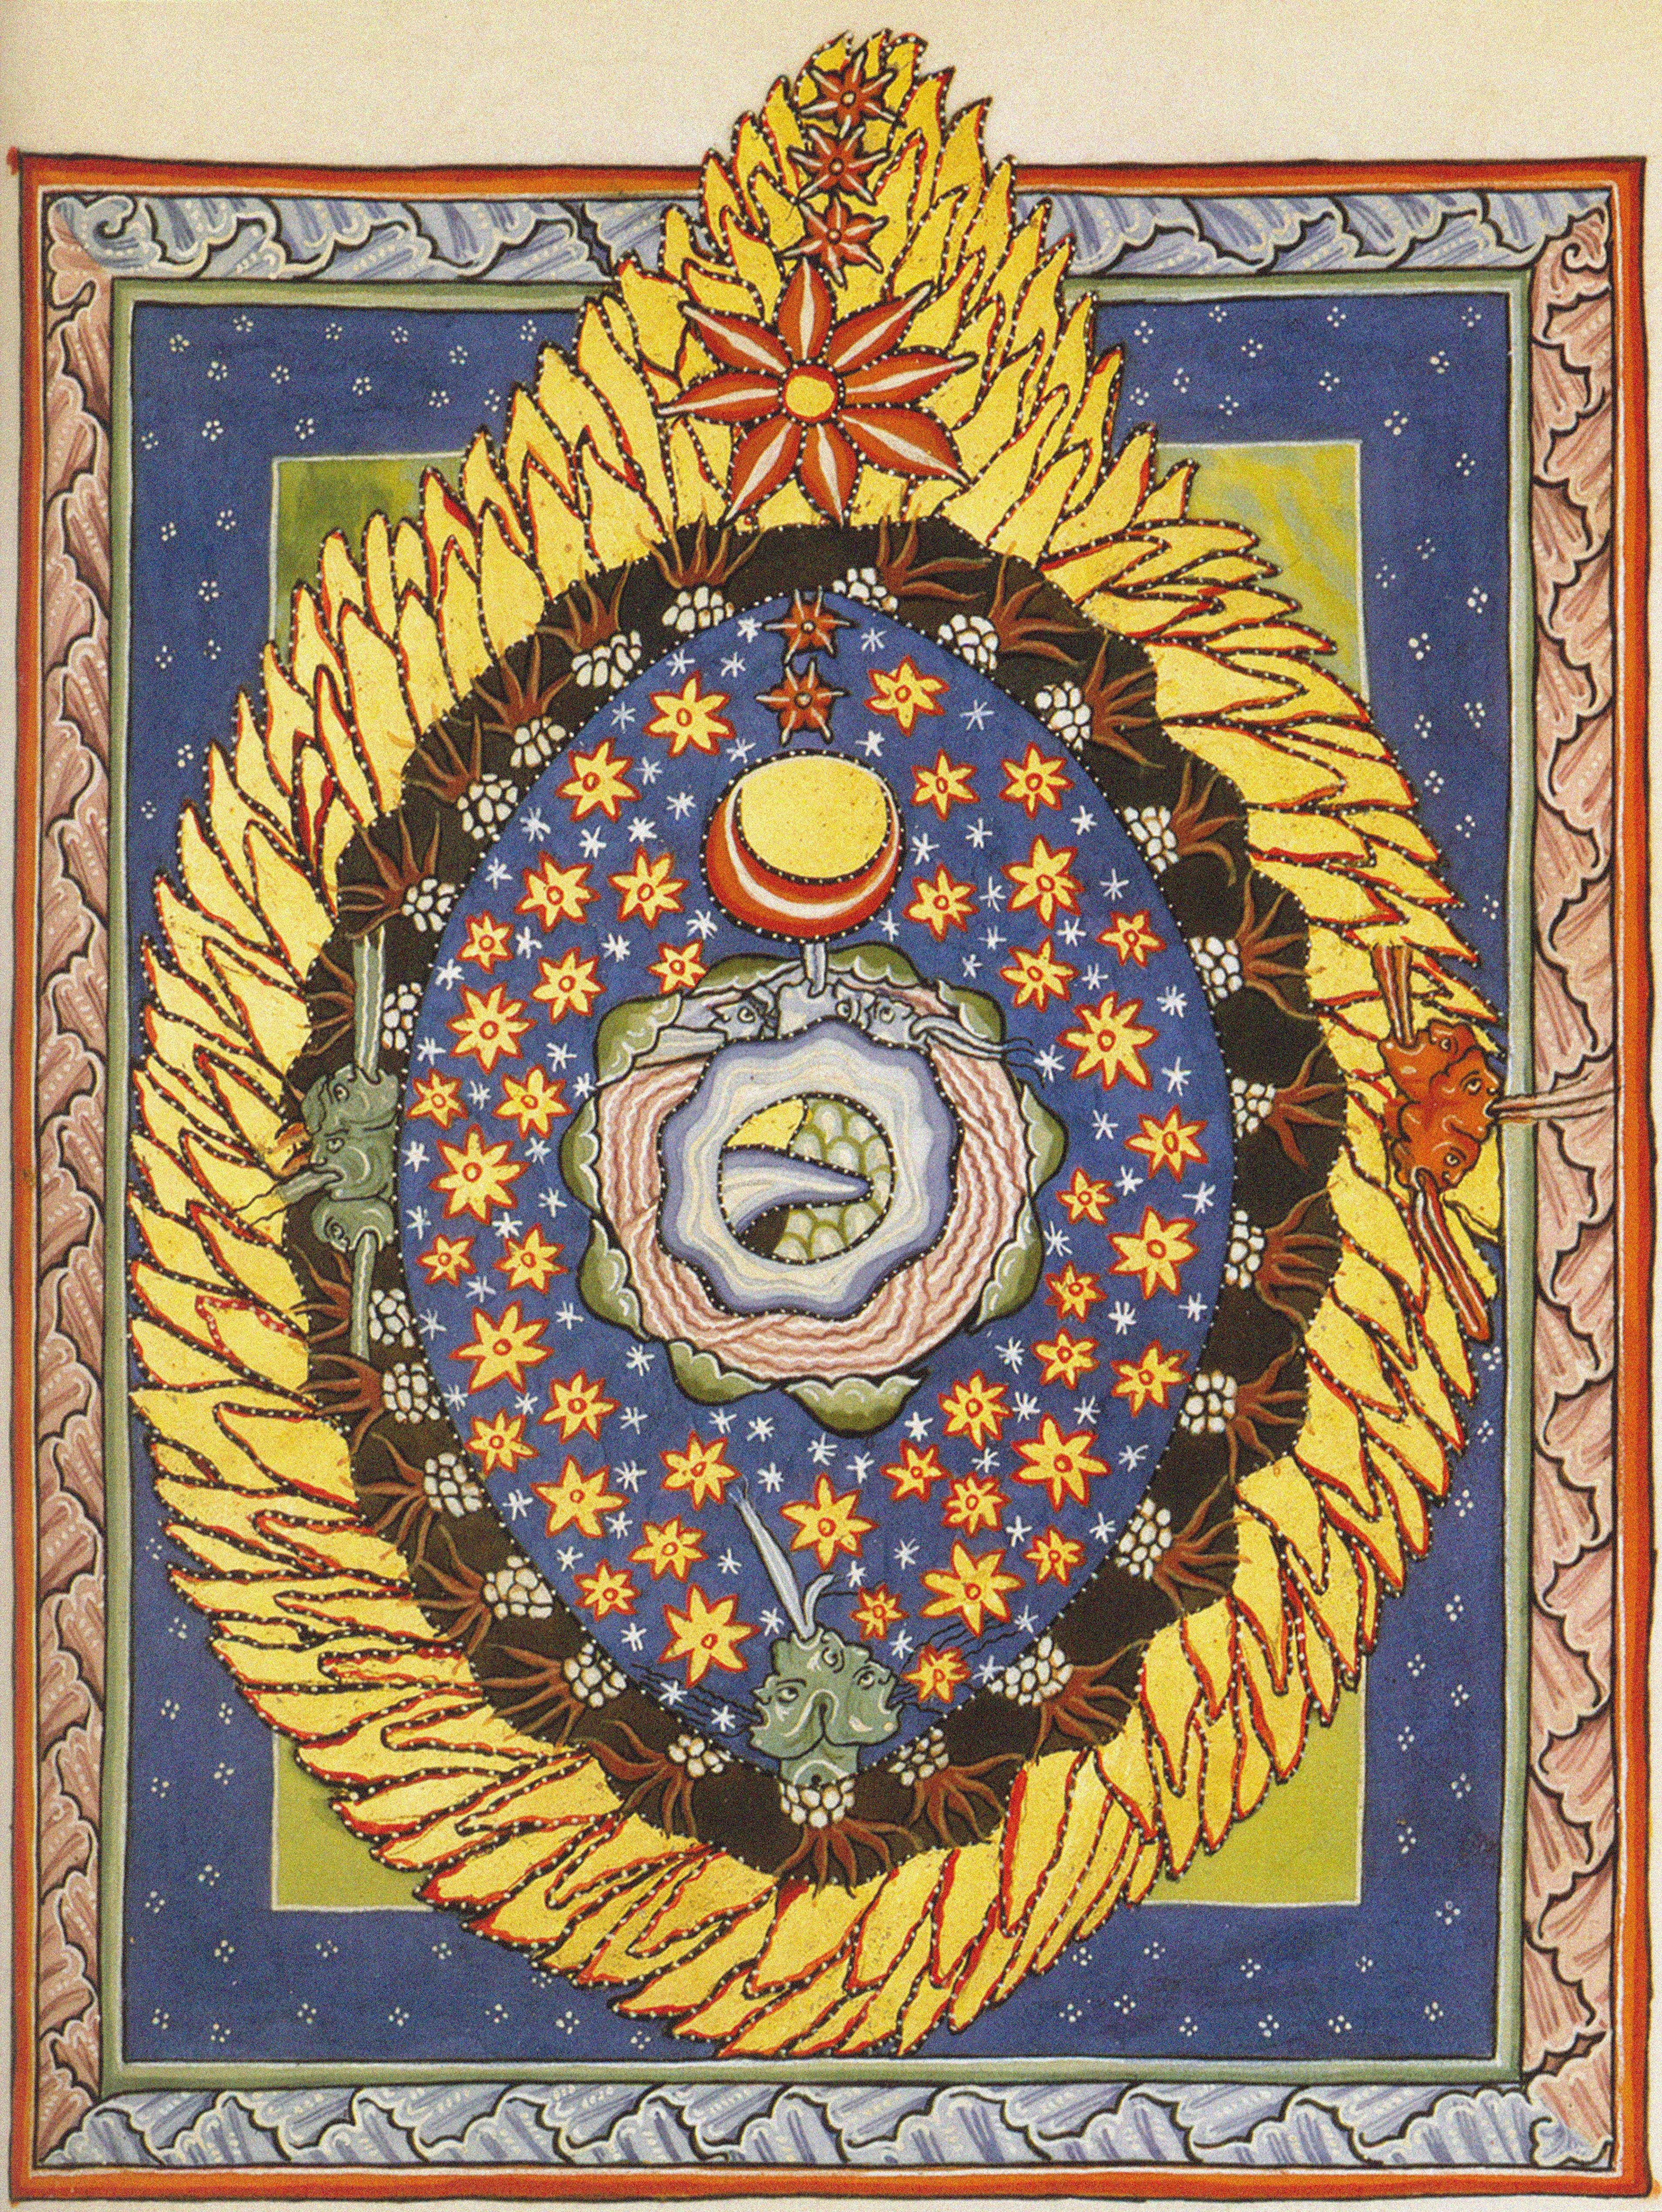 A depiction of the cosmic egg of the universe, encircled by the flames of God's love, from one of Hildegard's books on her visions.